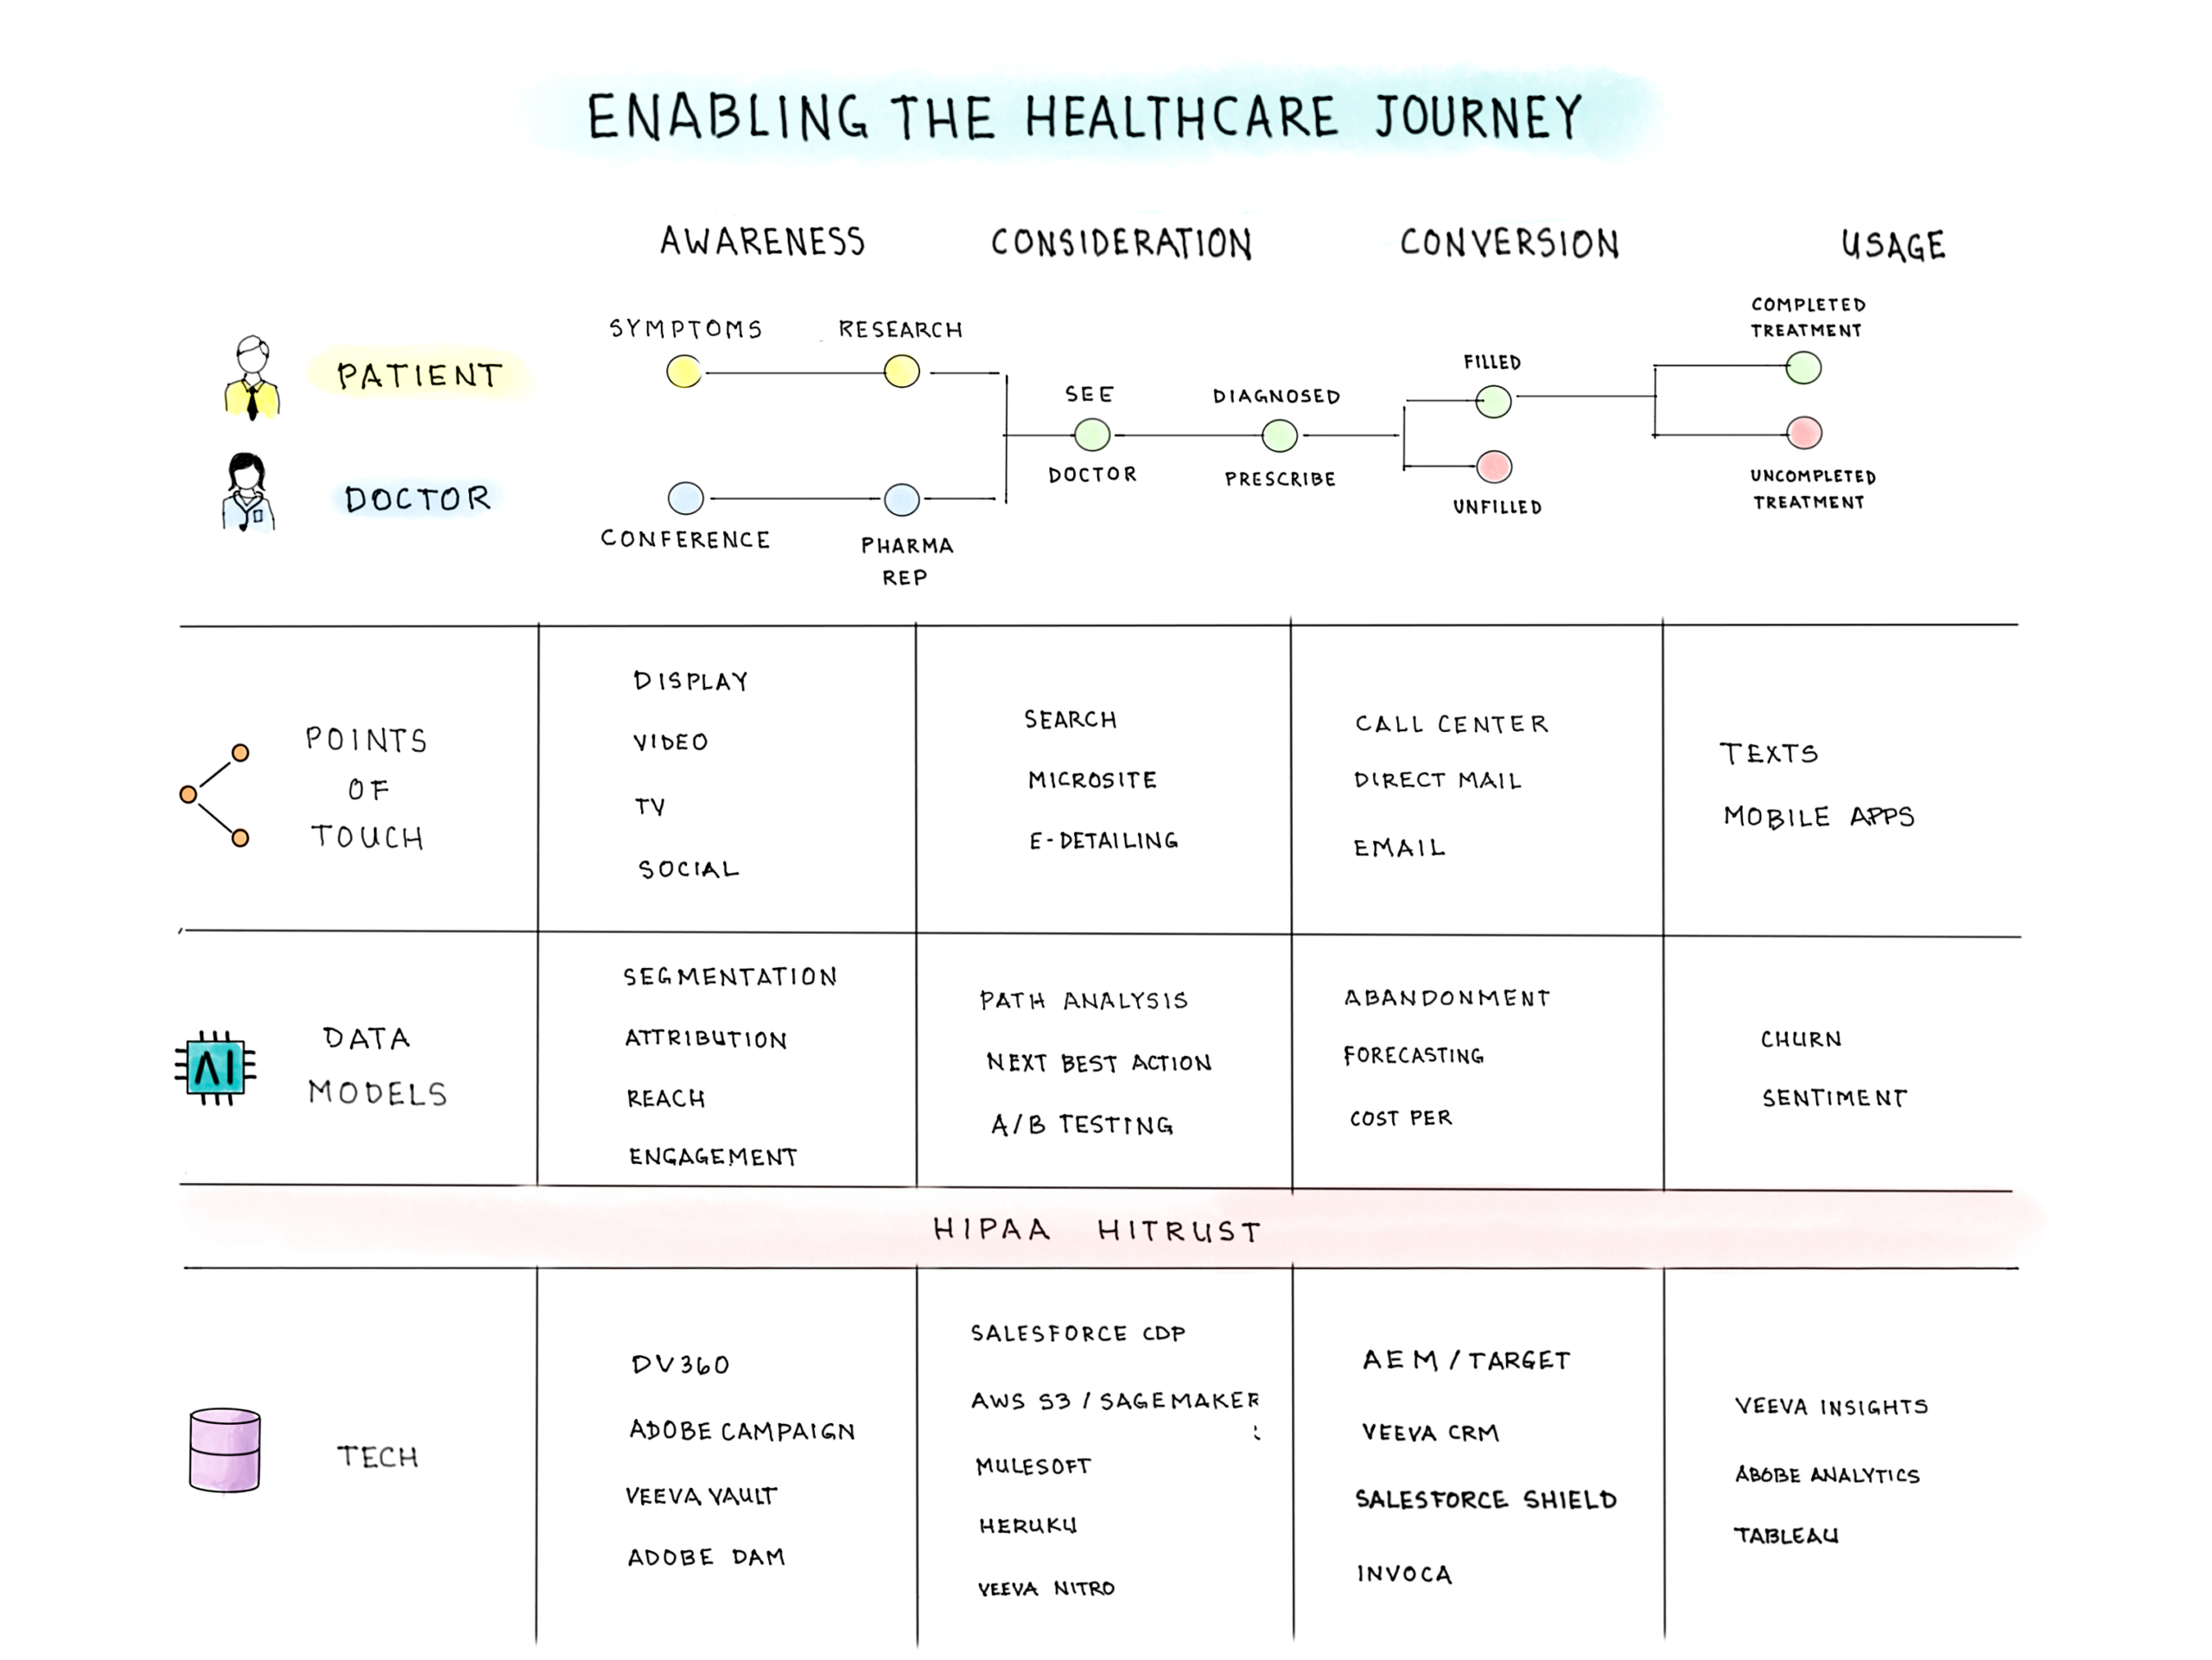 Notebook Thoughts: Enabling the Healthcare Journey